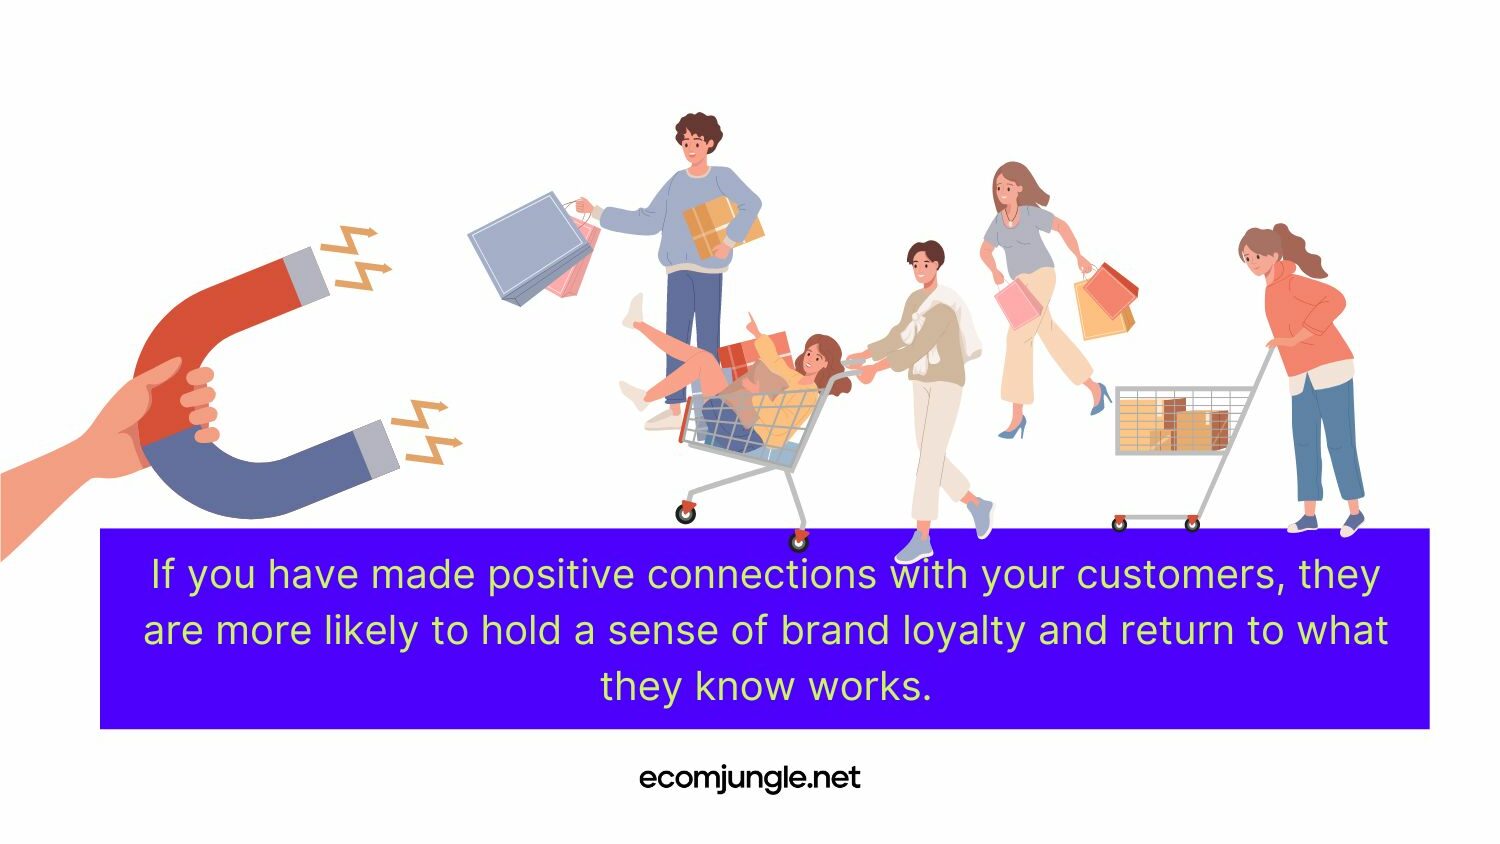 Regular and active work and communication with your customer can lead to better results than your competitors.